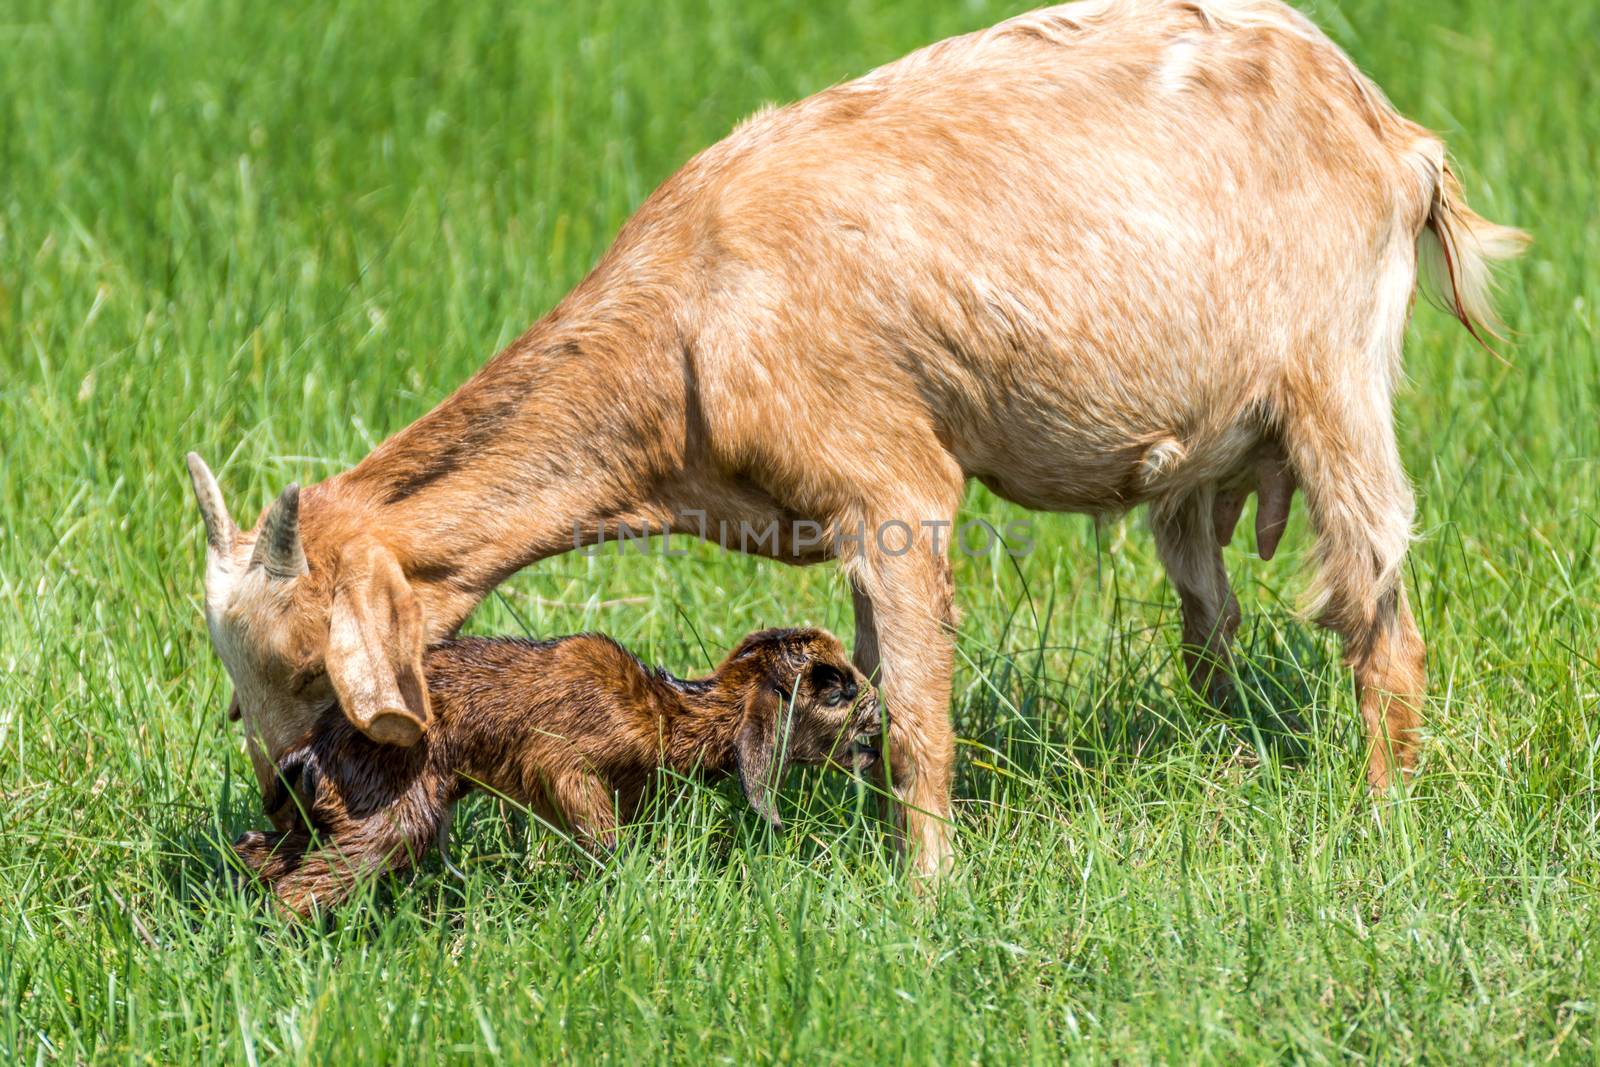 Goat baby a newborn attempt to stand get a help and take care from mother goat with love in a farm